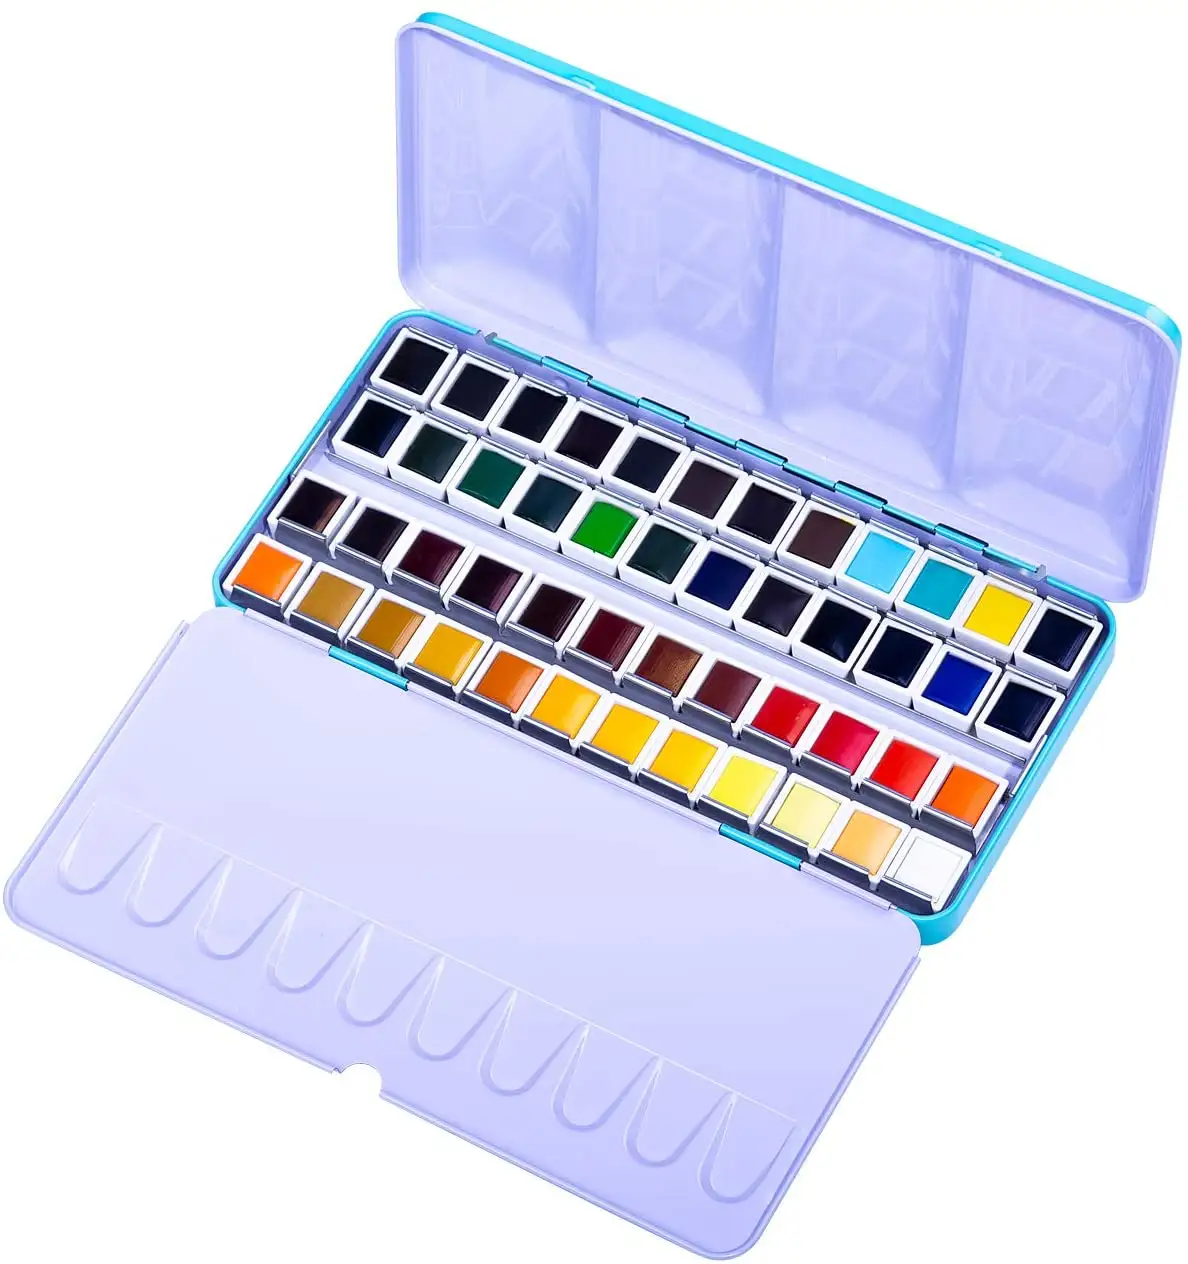 Professional 48 colors solid watercolor paint set with brush pen in portable tin box for artist